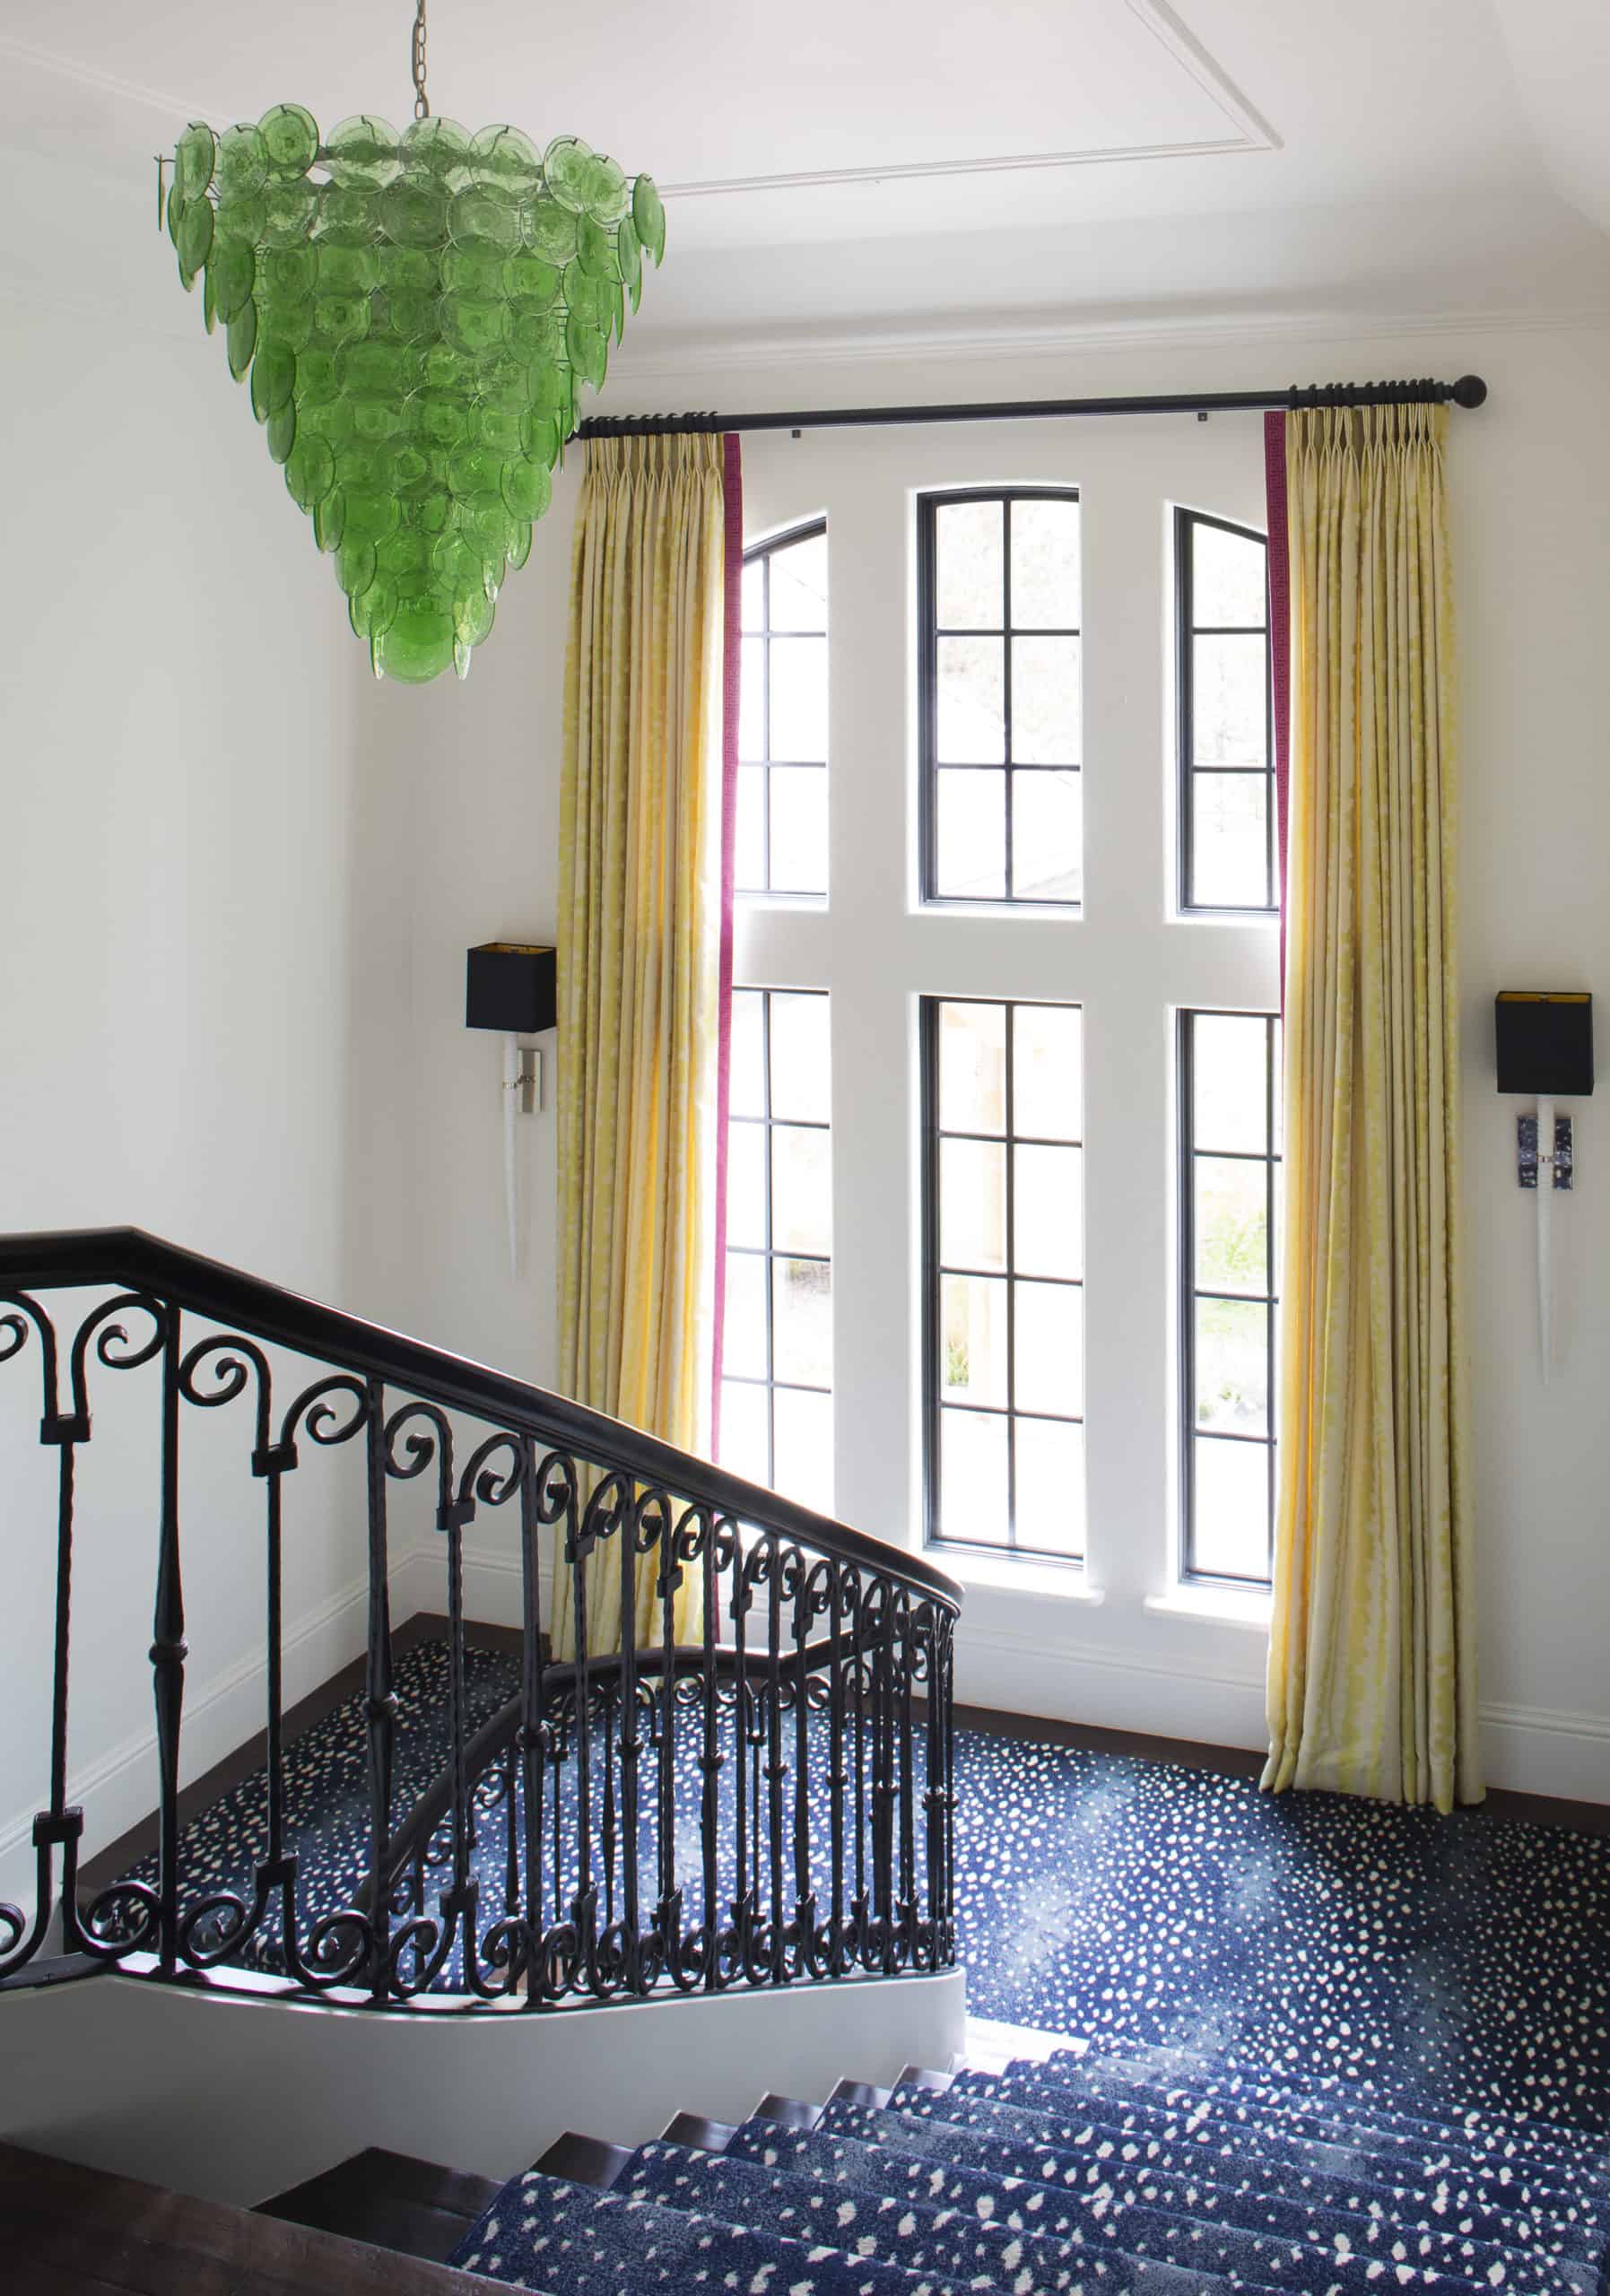 Staircase with green murano glass chandelier, 9 foot draperies, plush stair runner and rounded wood banister